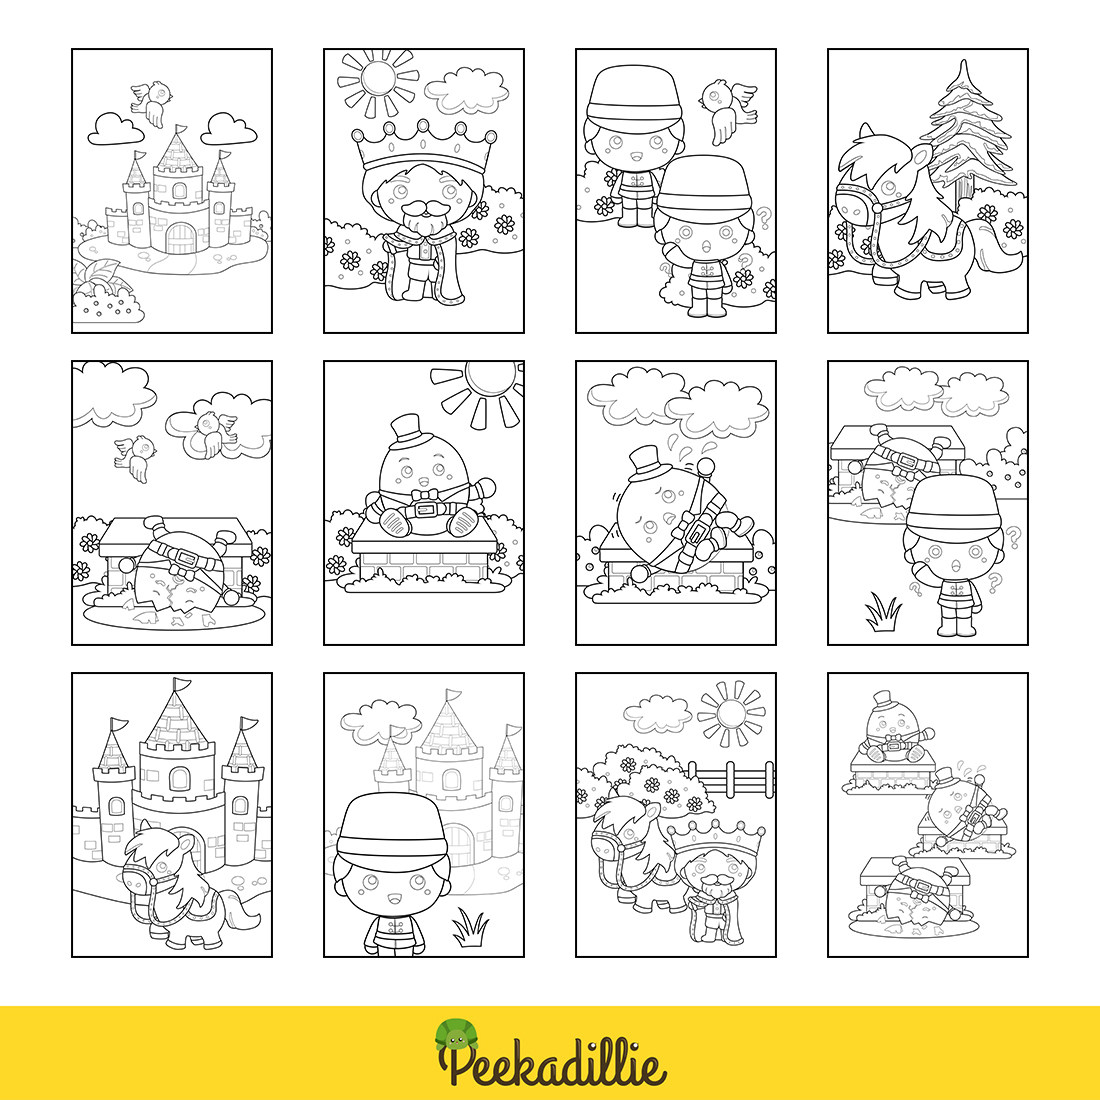 Humpty Dumpty Classic Song Rhymes Story Coloring Pages Activity For Kids And Adult preview image.